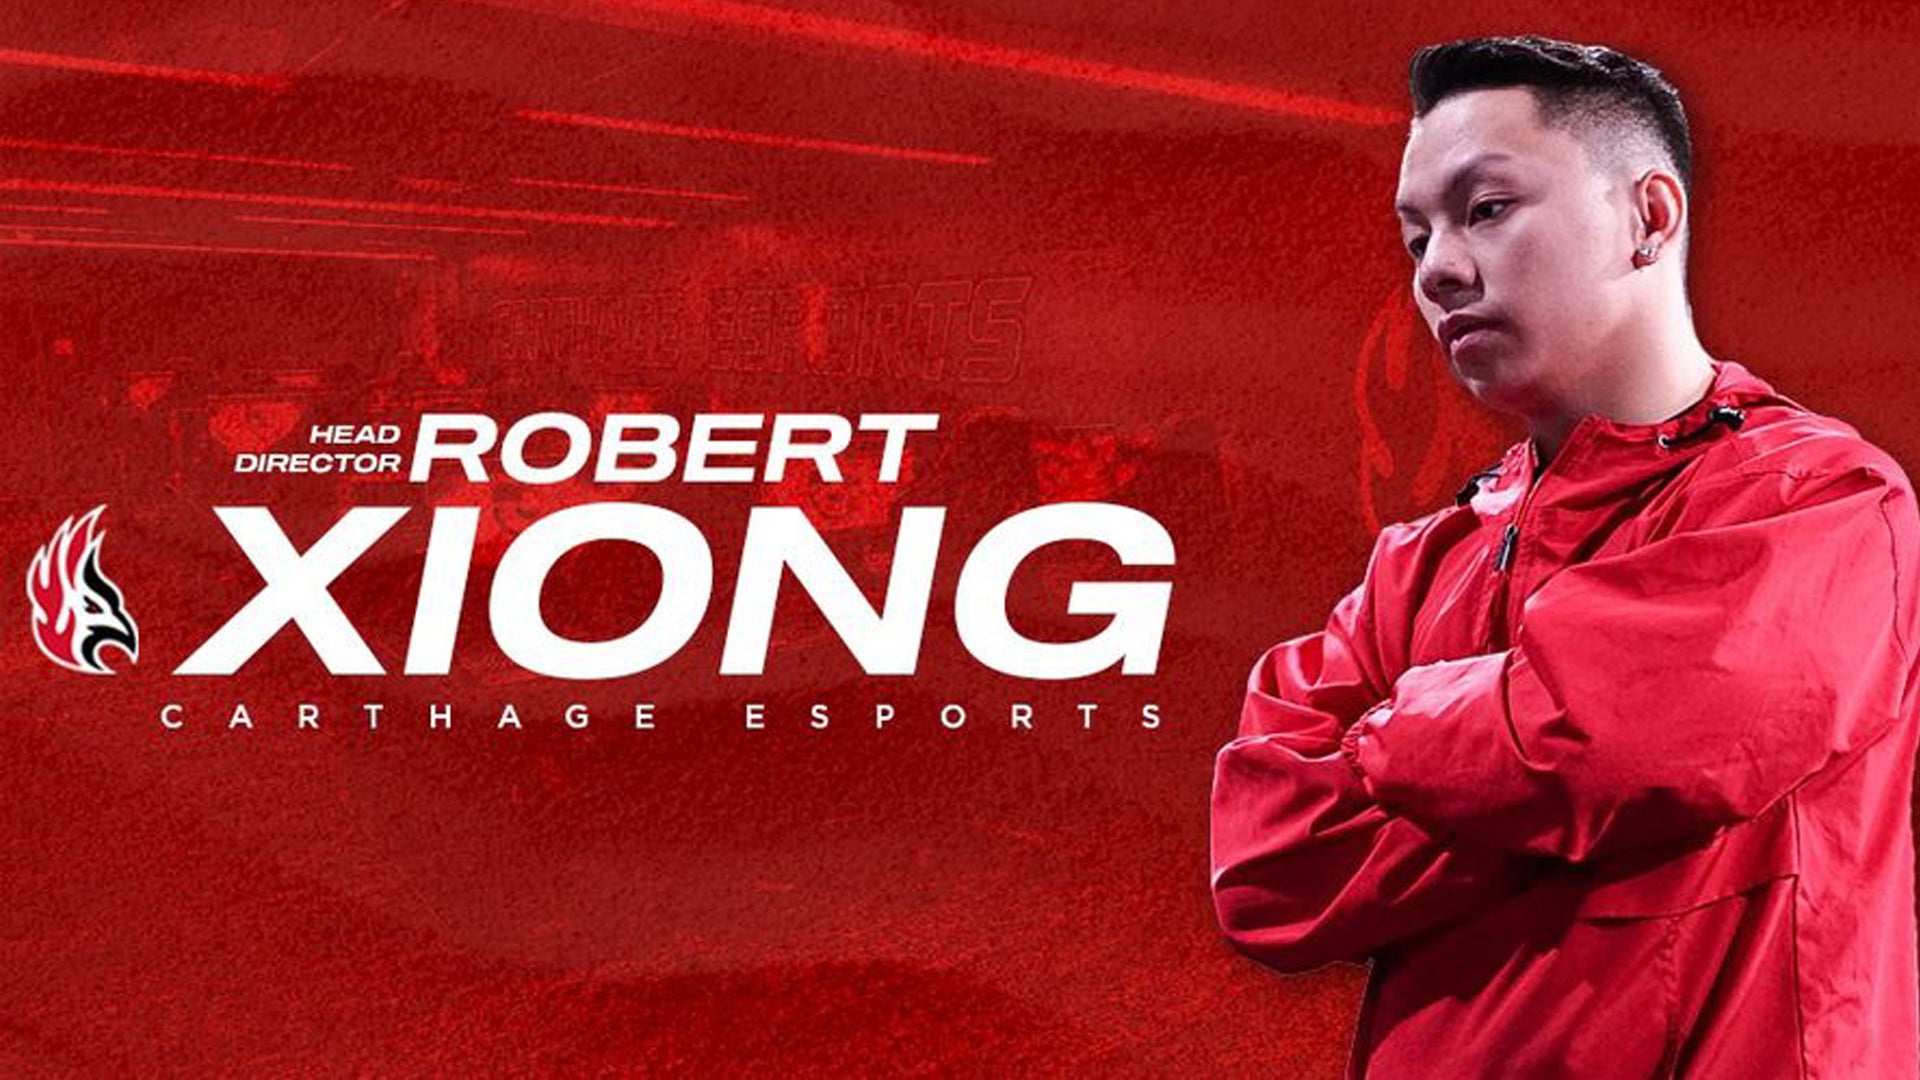 Carthage Athletics Appoints Robert Xiong Director of Esports